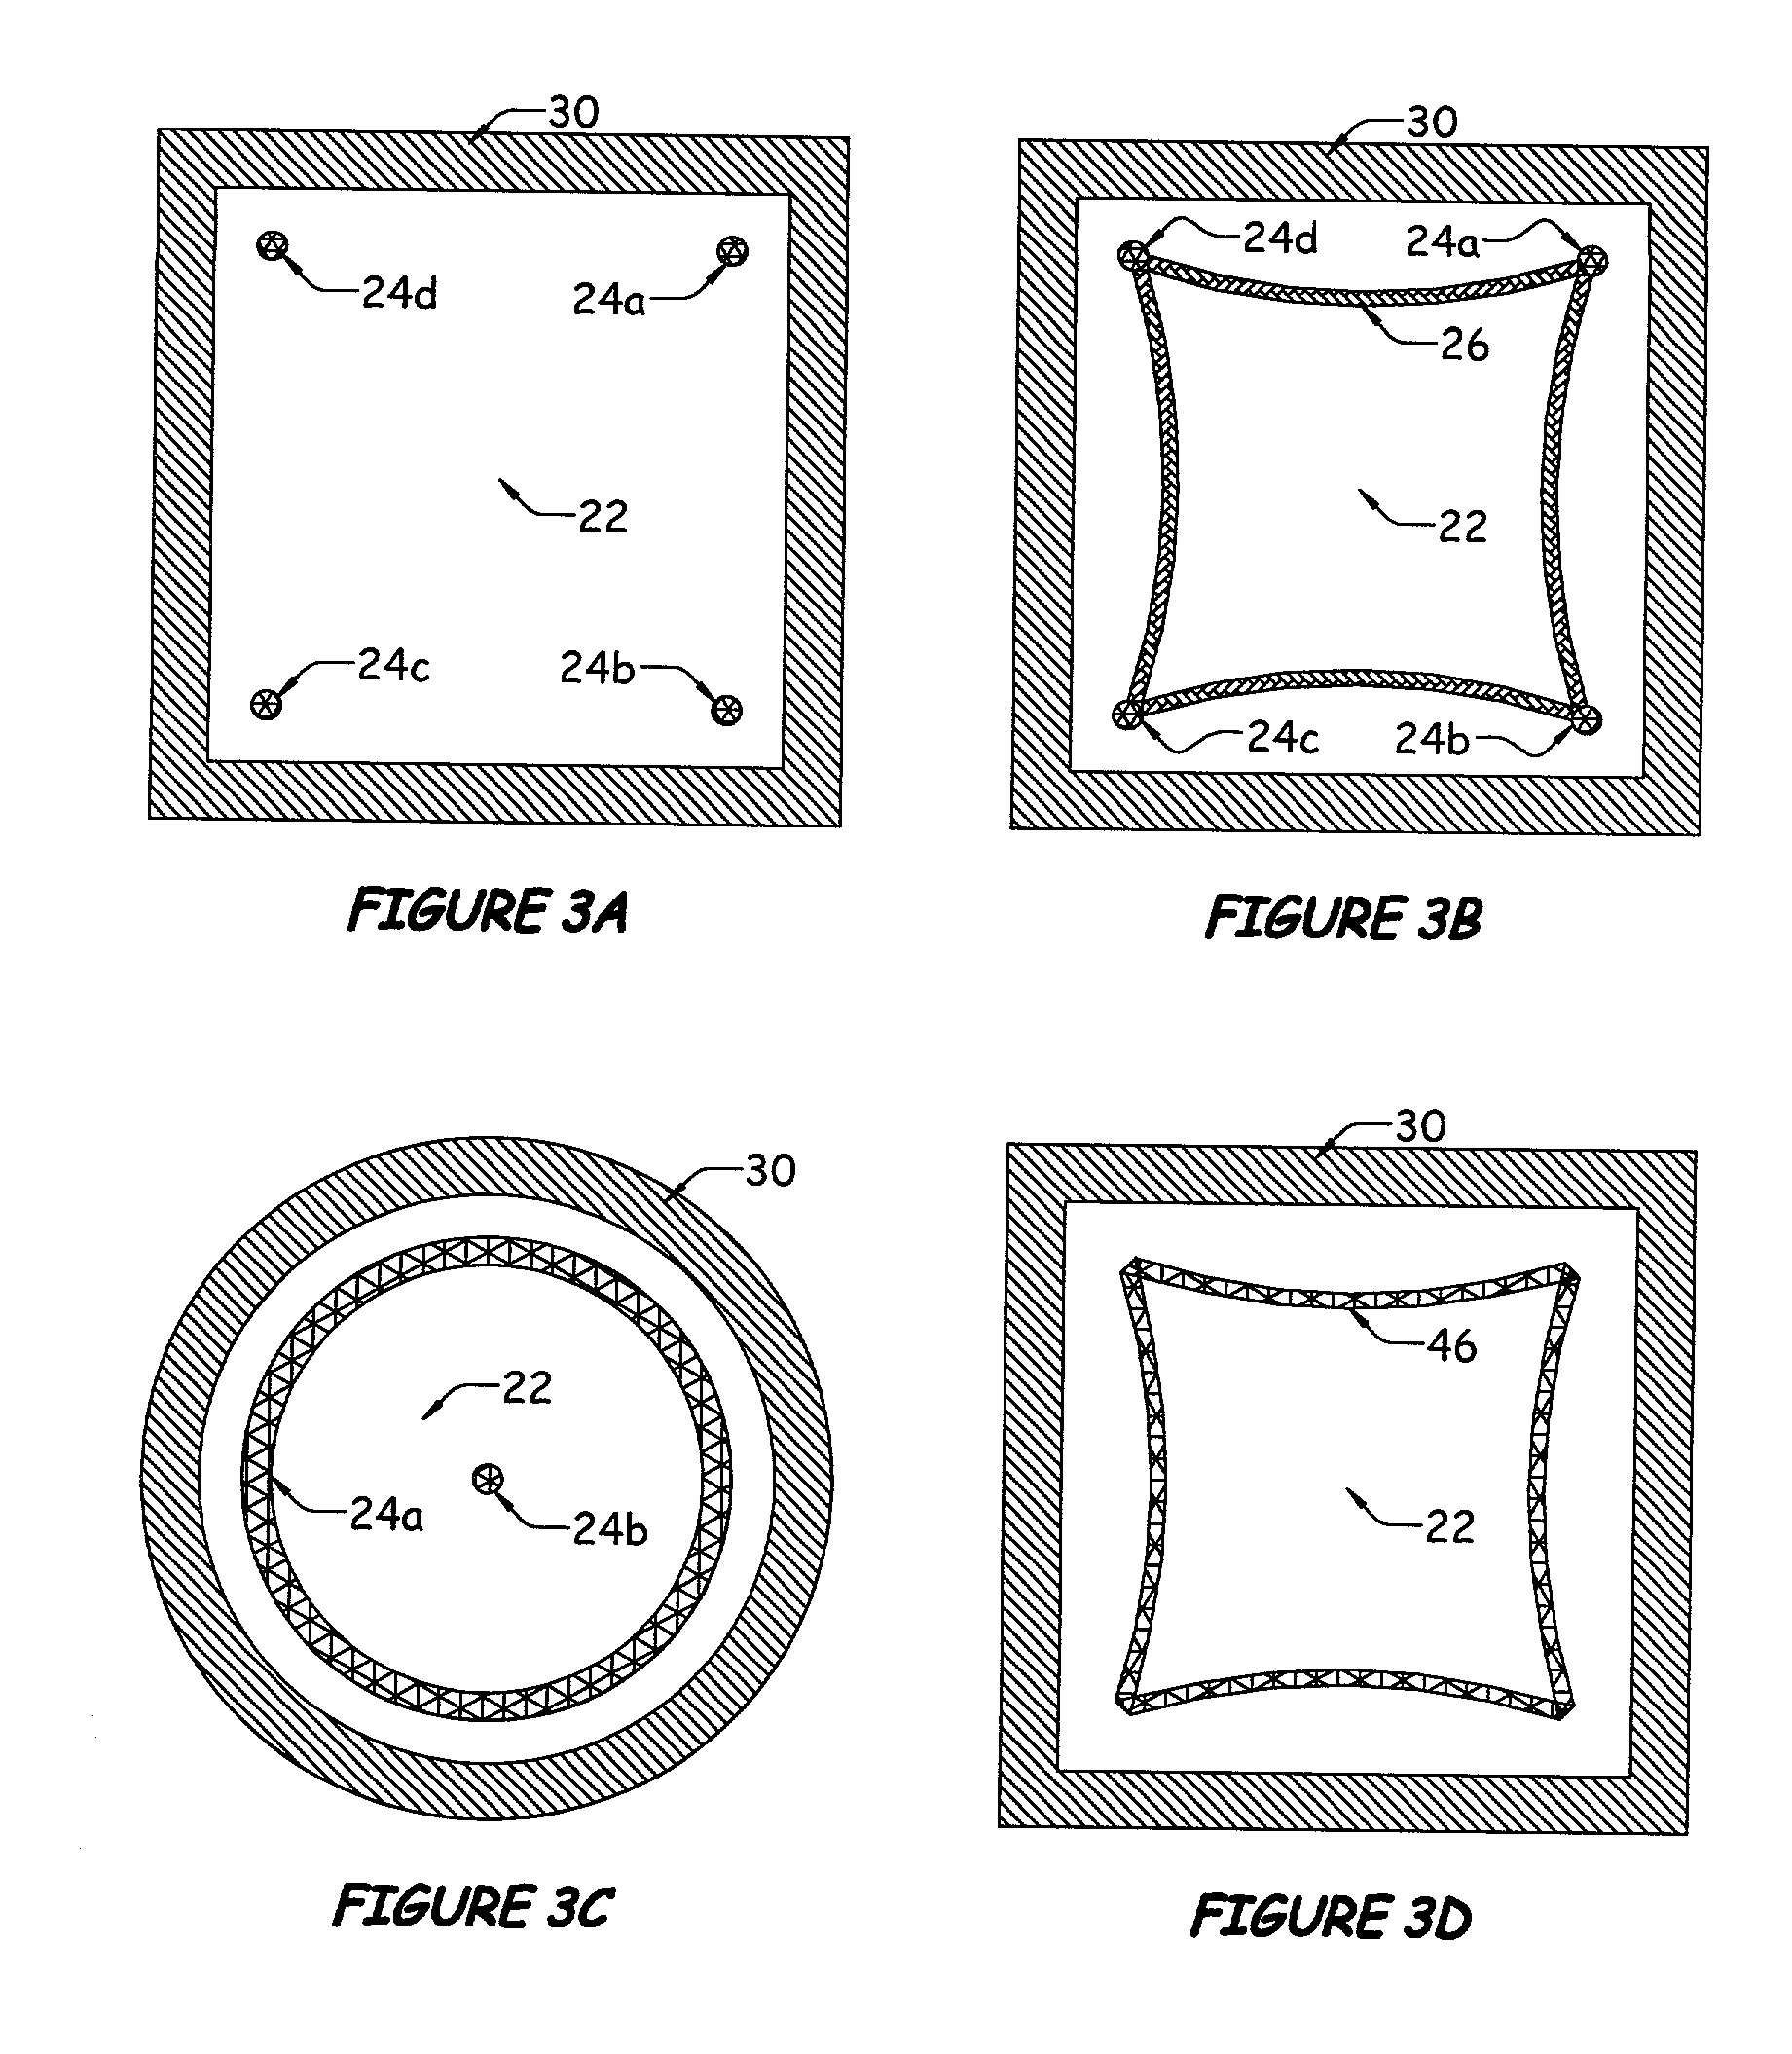 Position sensitive solid state detector with internal gain